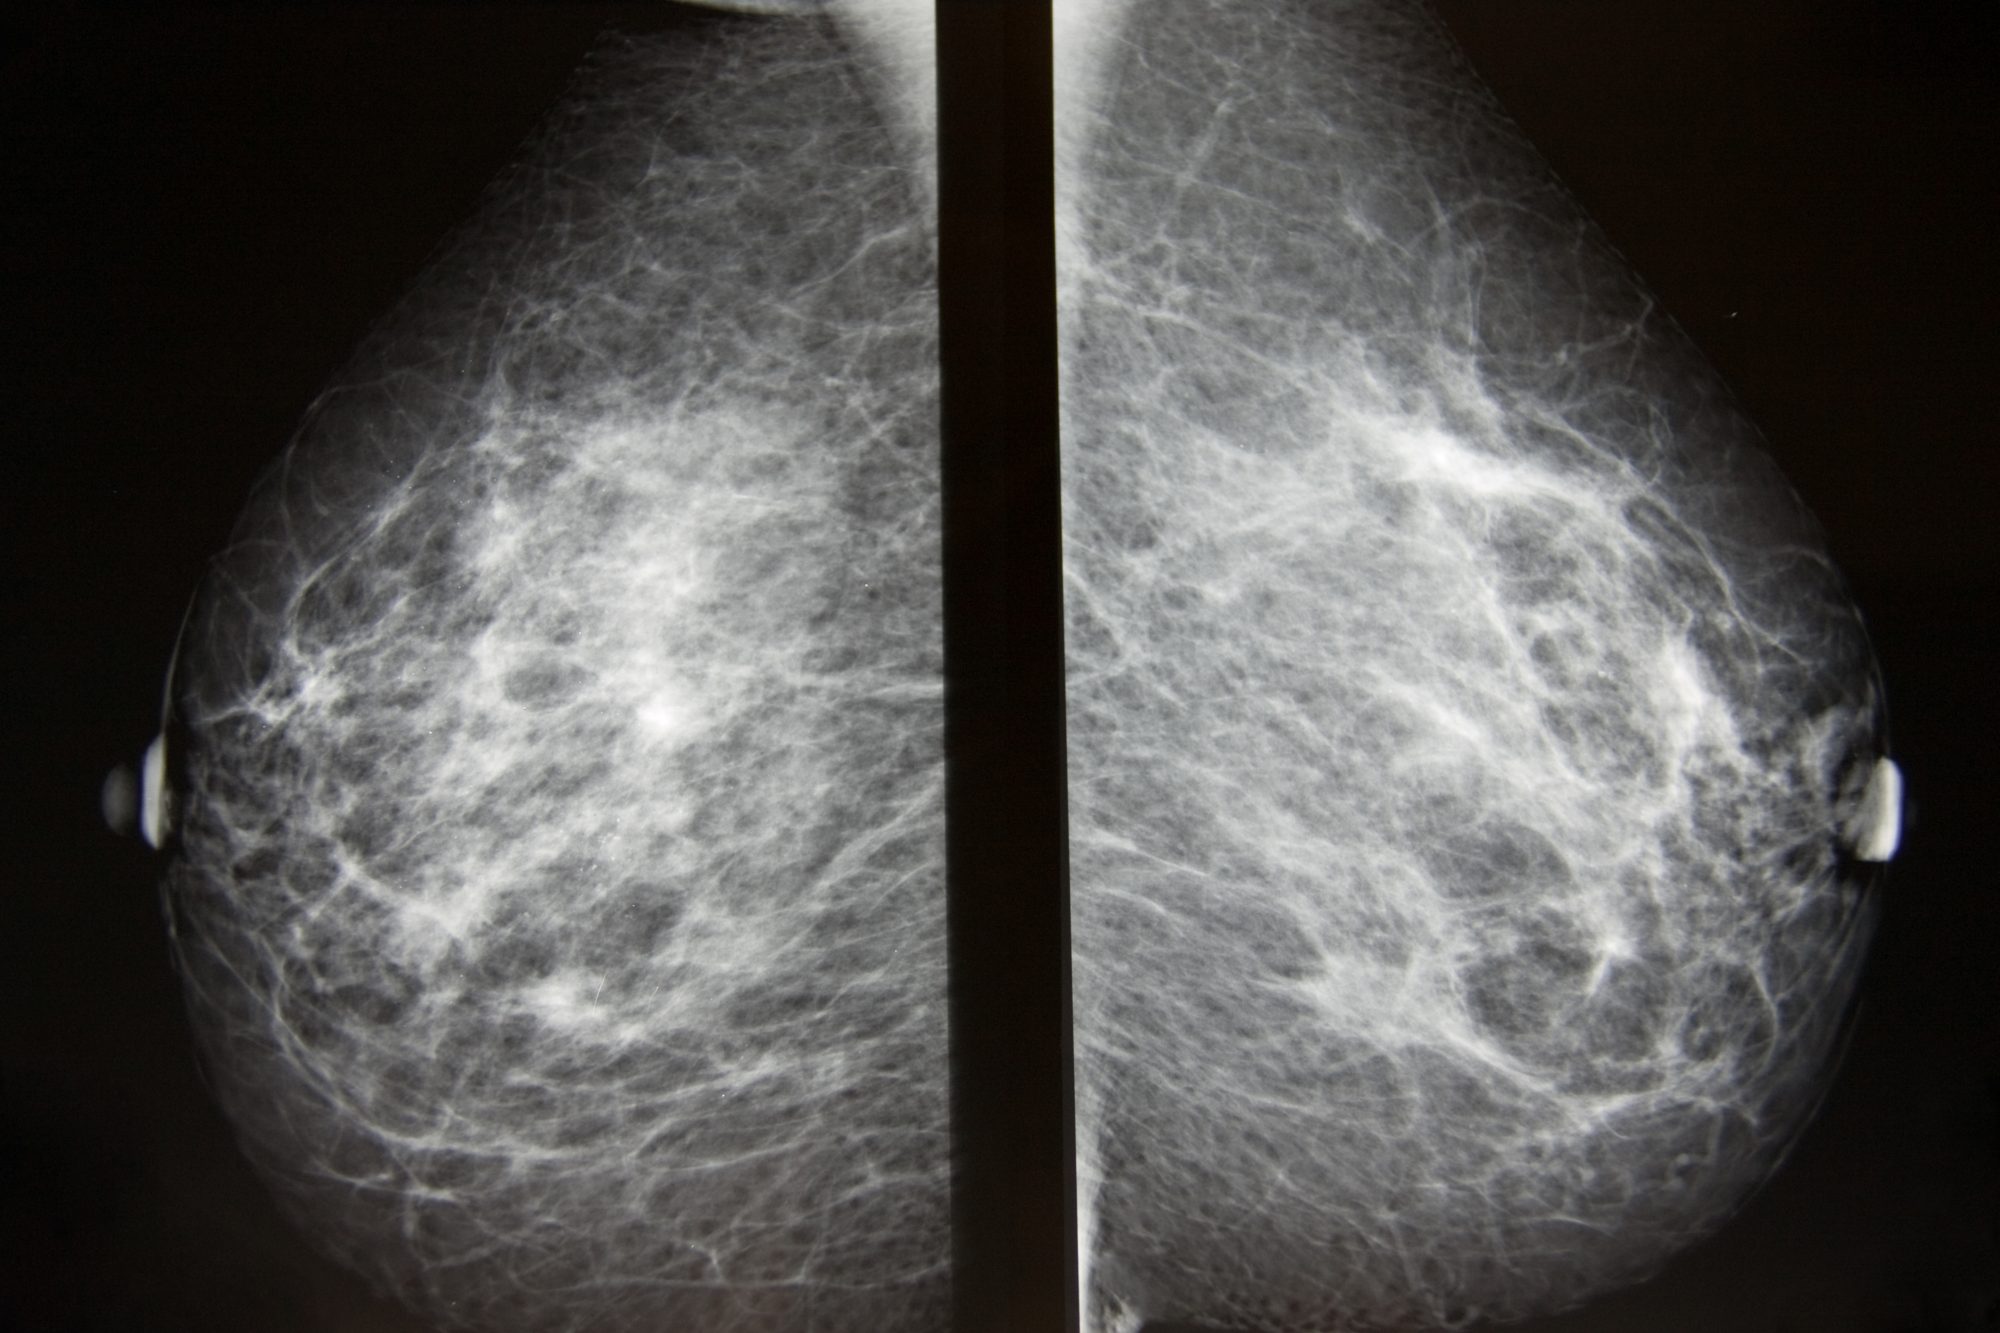 Screening for breast cancer scan image, HRT and the risk of breast cancer